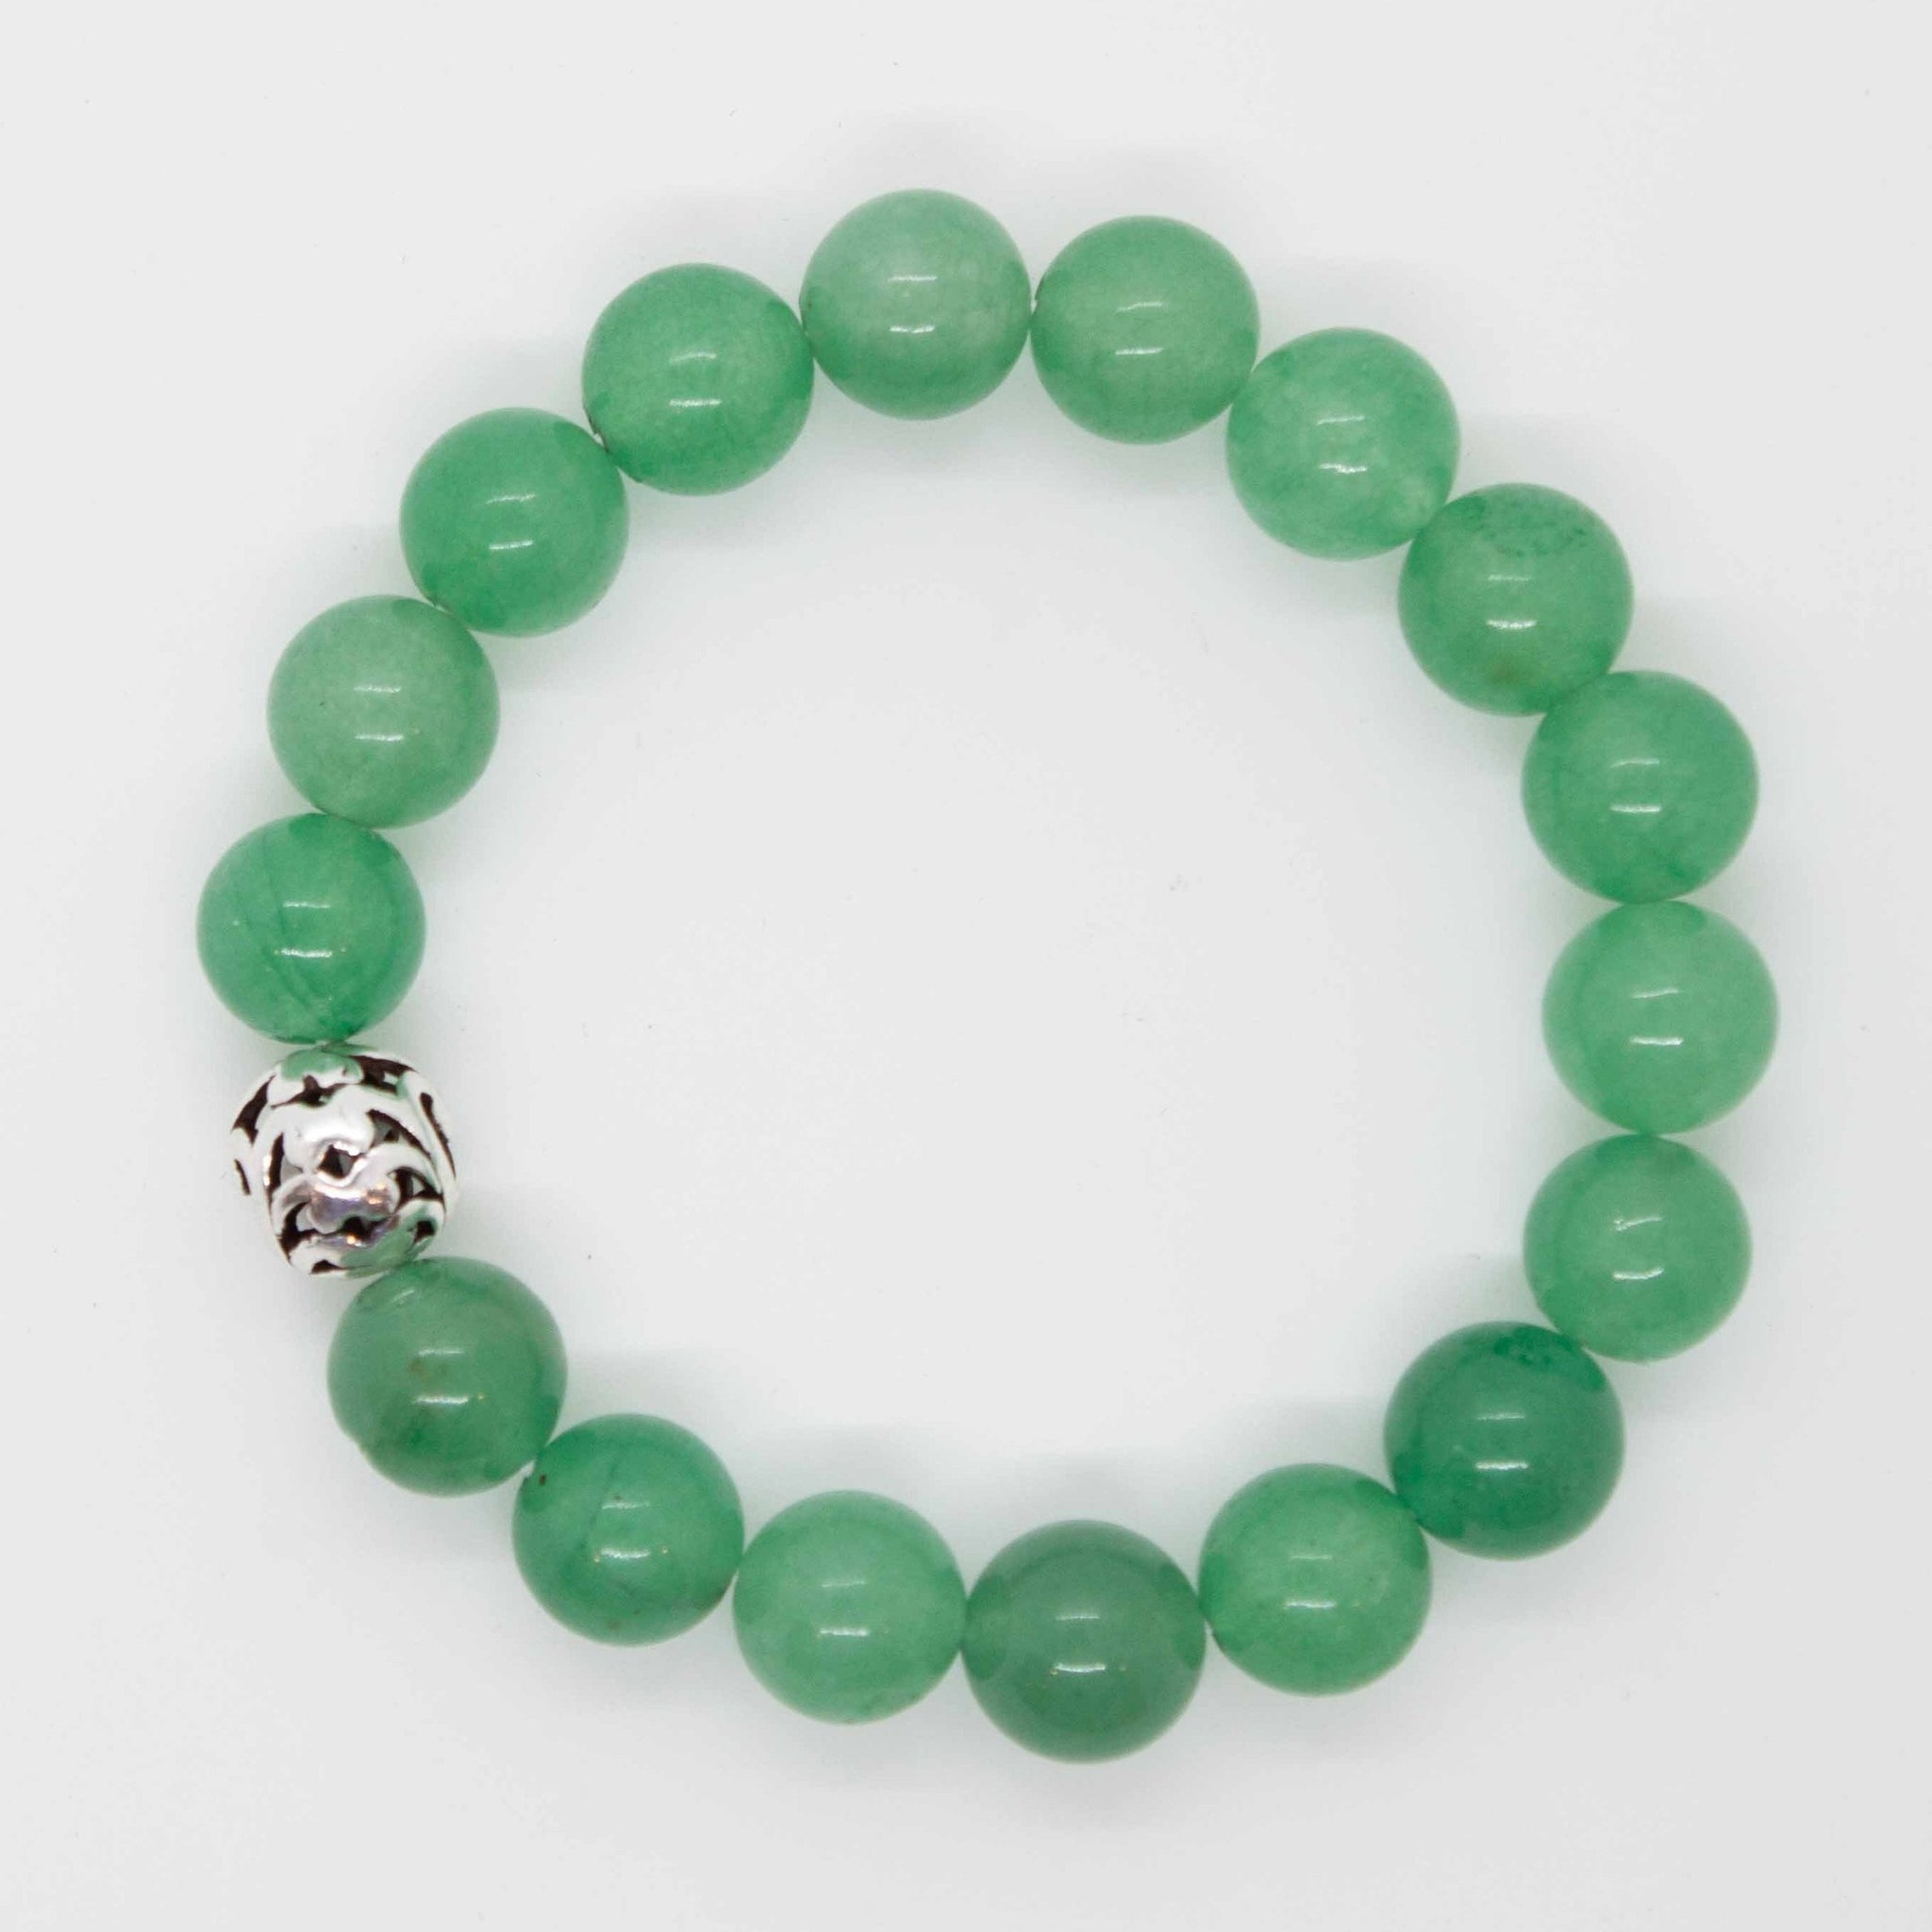 7 inch beaded aventurine bracelet stack with pewter accent bead.